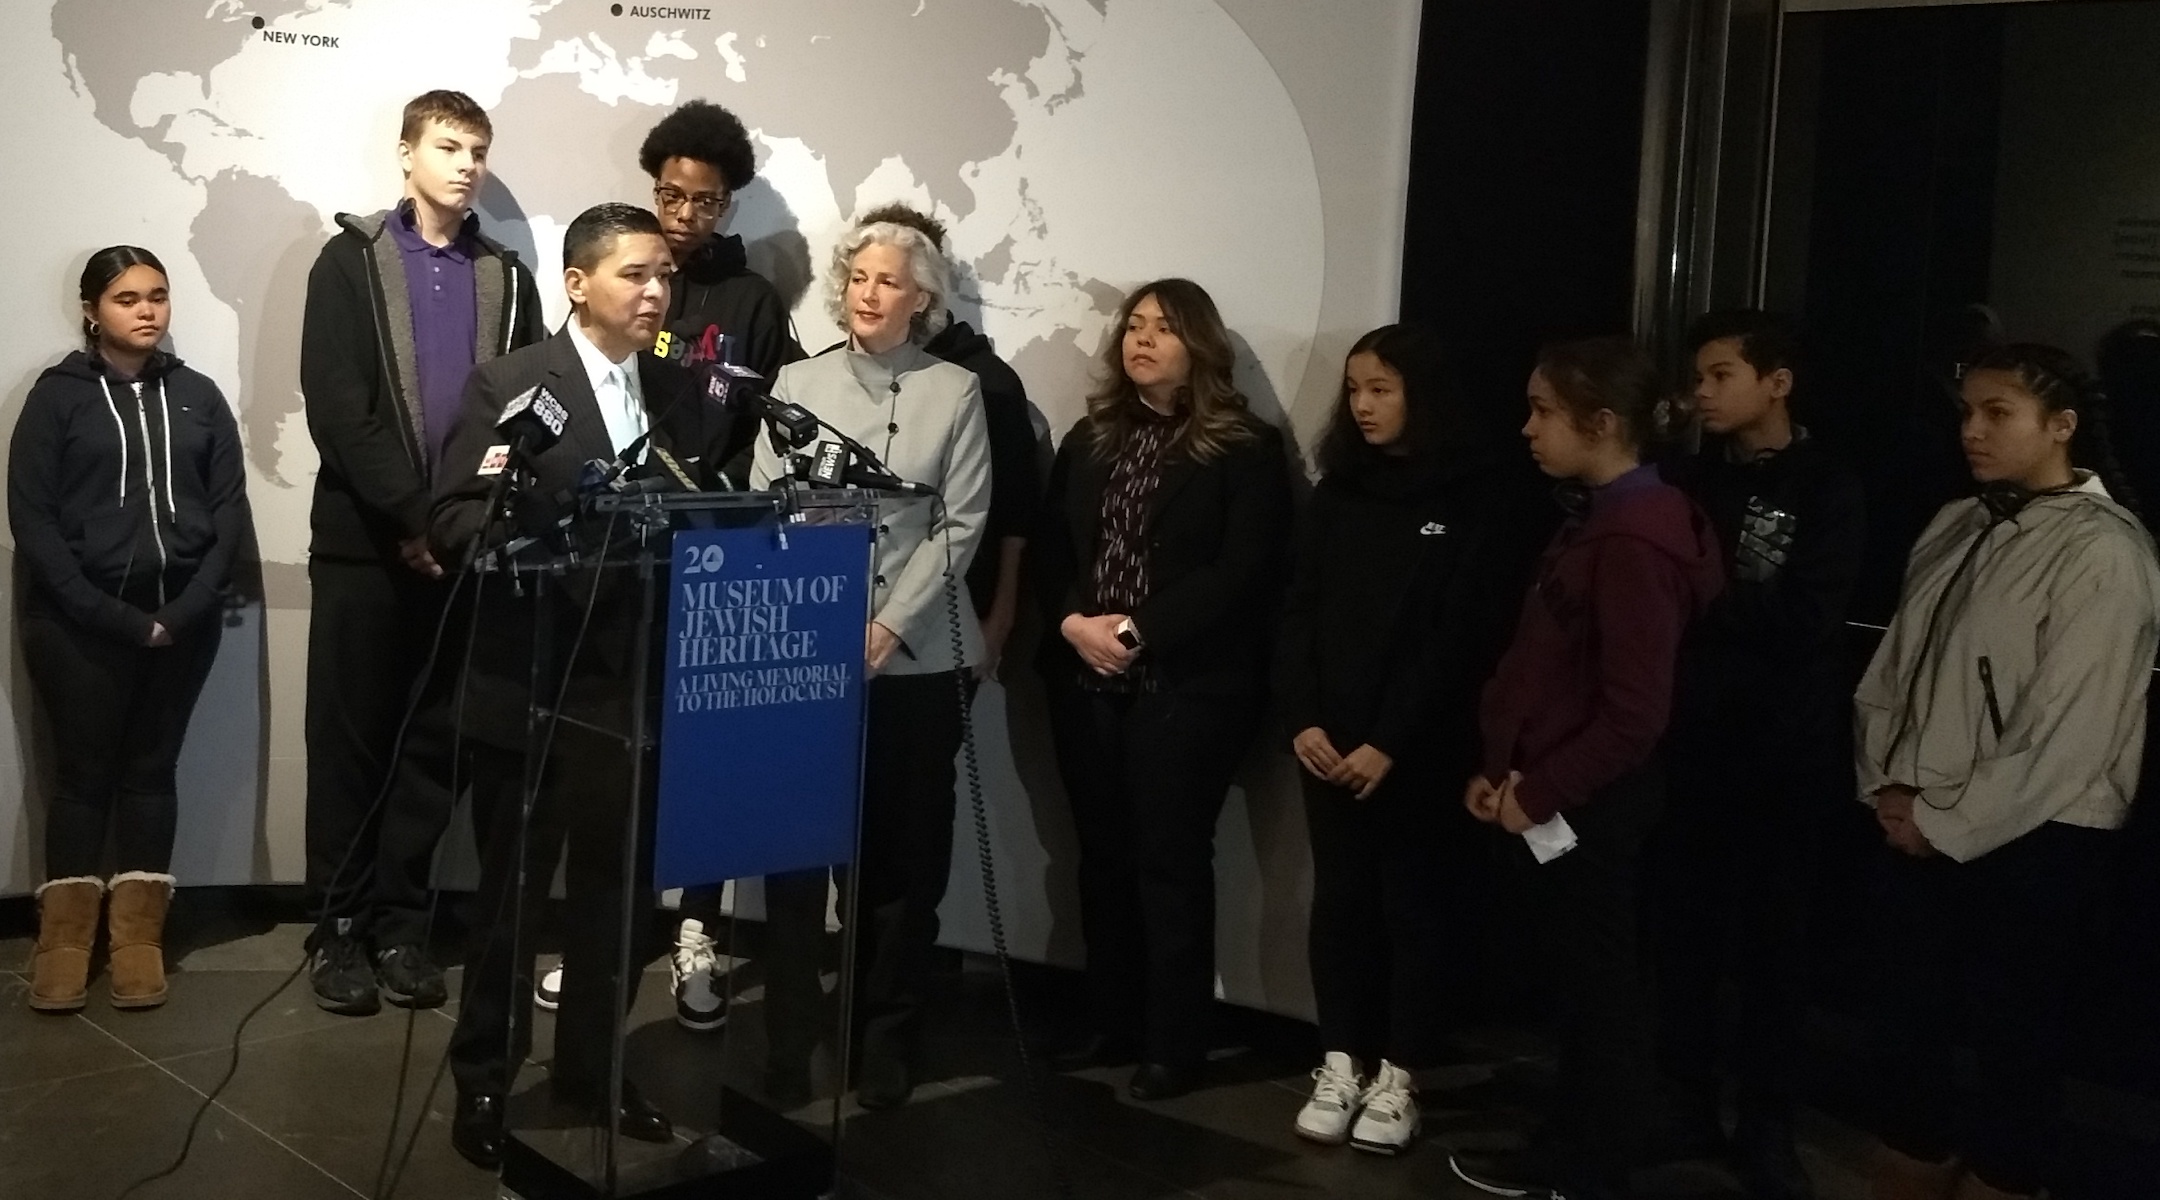 New York City Schools Chancellor Richard Carranza speaks at a press conference head of a students' tour of the Museum of Jewish Heritage in New York City on Jan. 15, 2020. (Ben Sales)